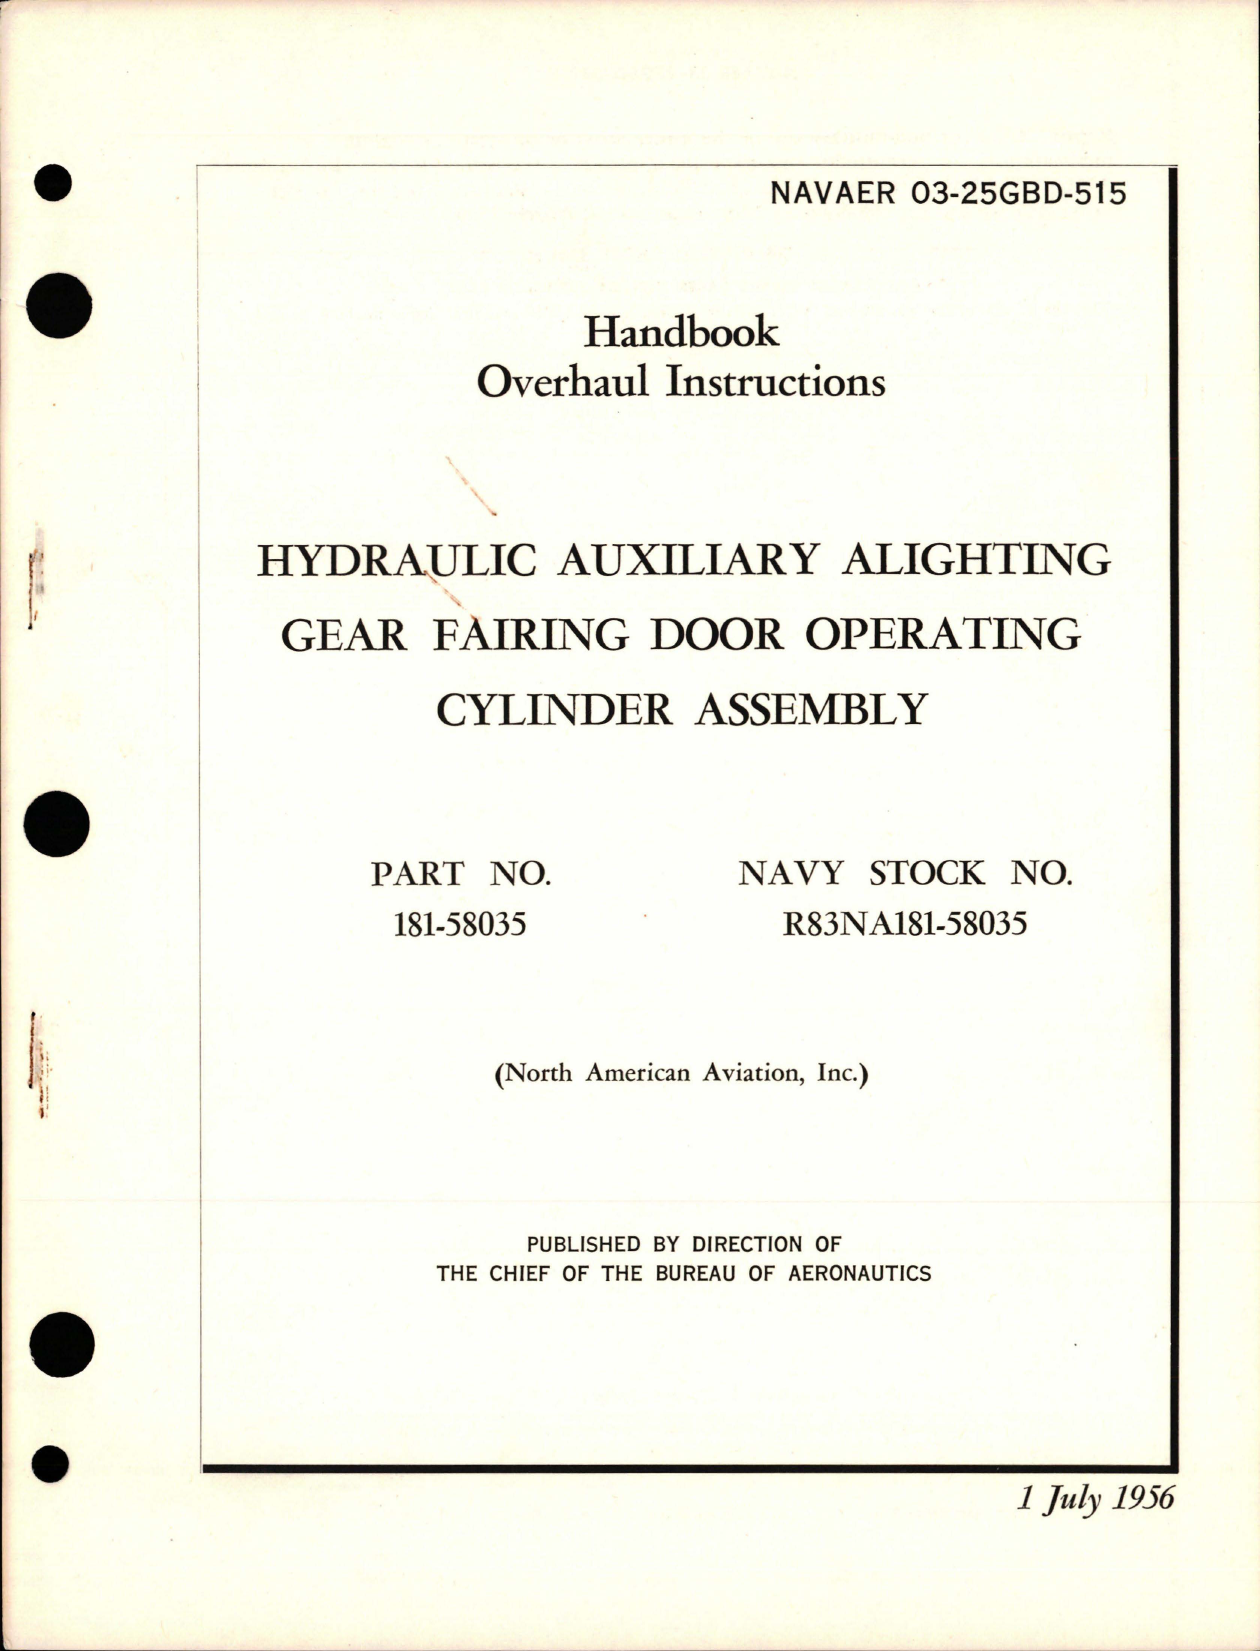 Sample page 1 from AirCorps Library document: Overhaul Instructions for Hydraulic Auxiliary Alighting Gear Fairing Door Operating Cylinder Assembly - Part 181-58035